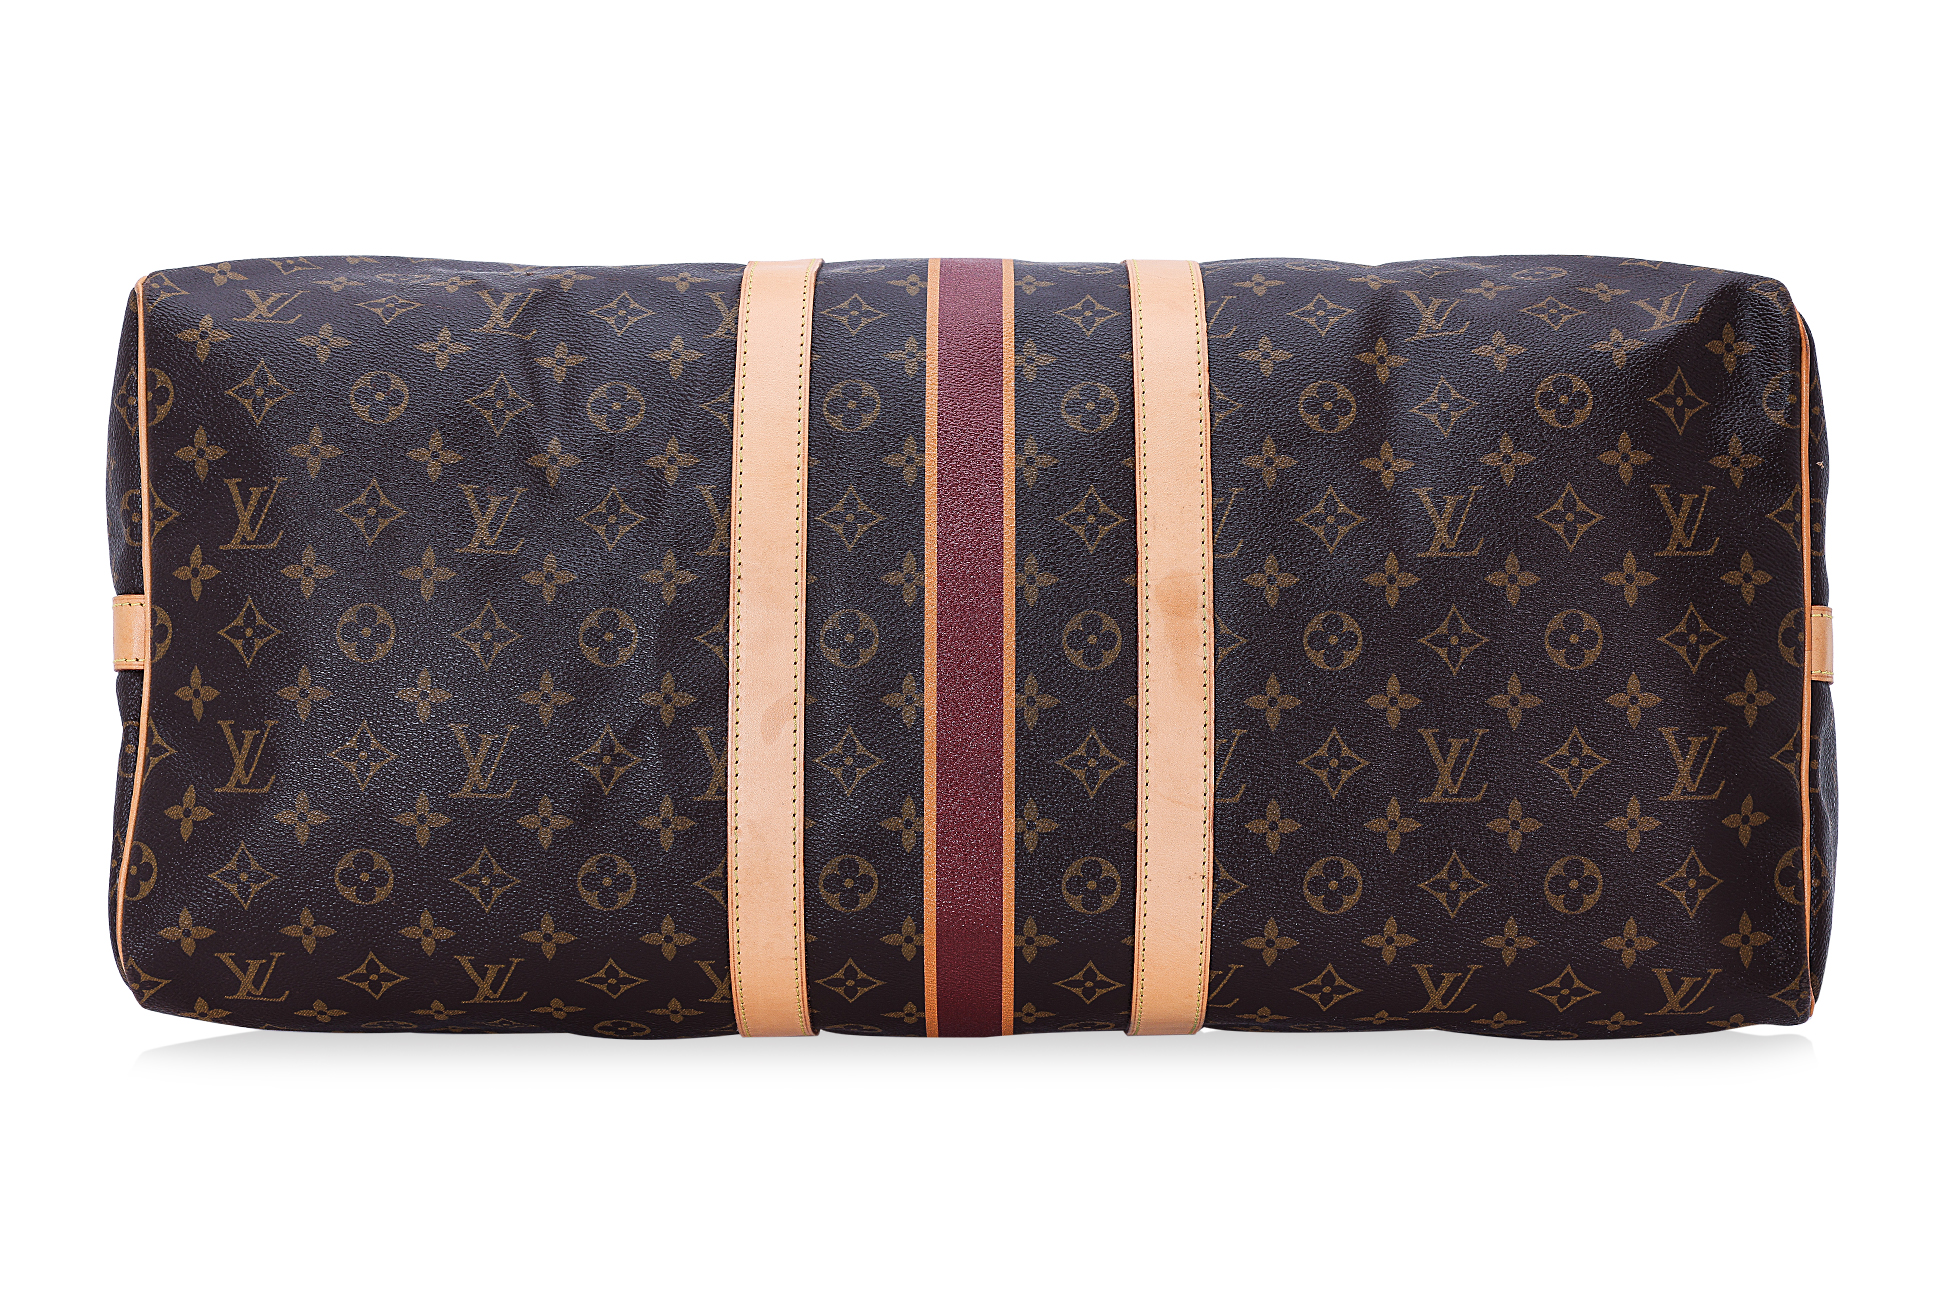 LOUIS VUITTON KEEPALL BANDOULIERE - Image 3 of 10